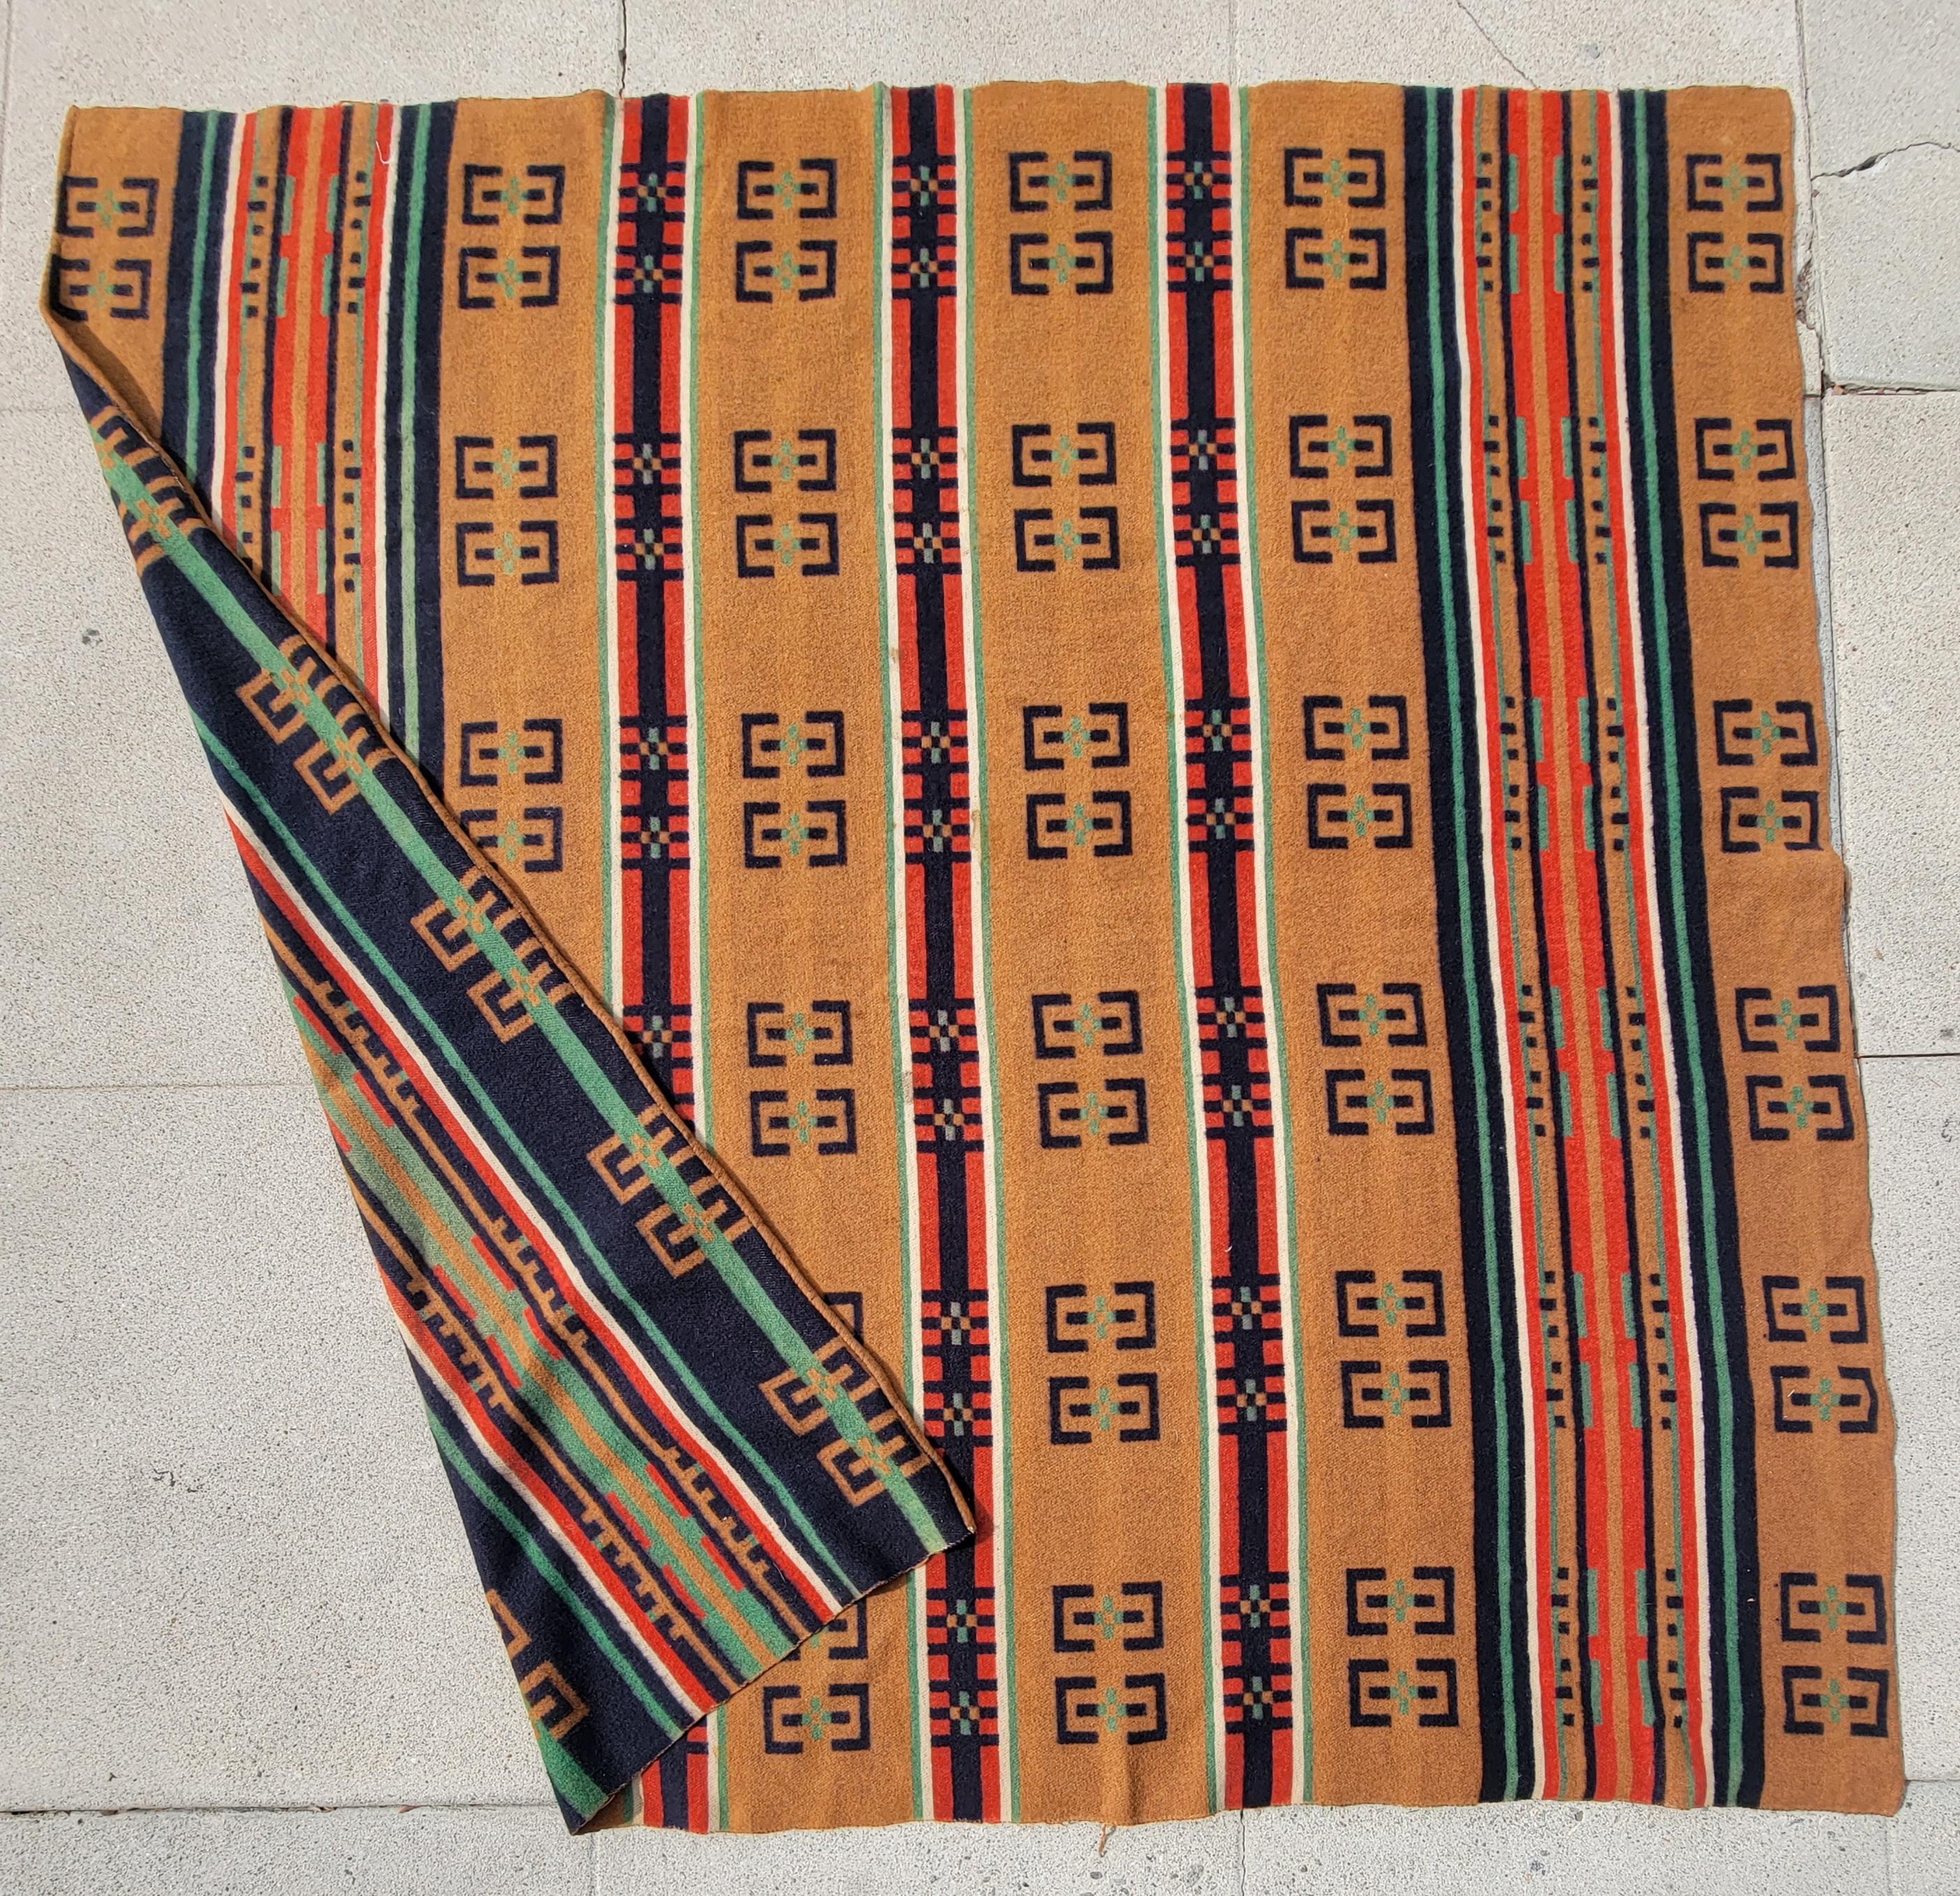 19Thc Wool striped horse blanket in fantastic condition & colors.These blankets are hard to find.